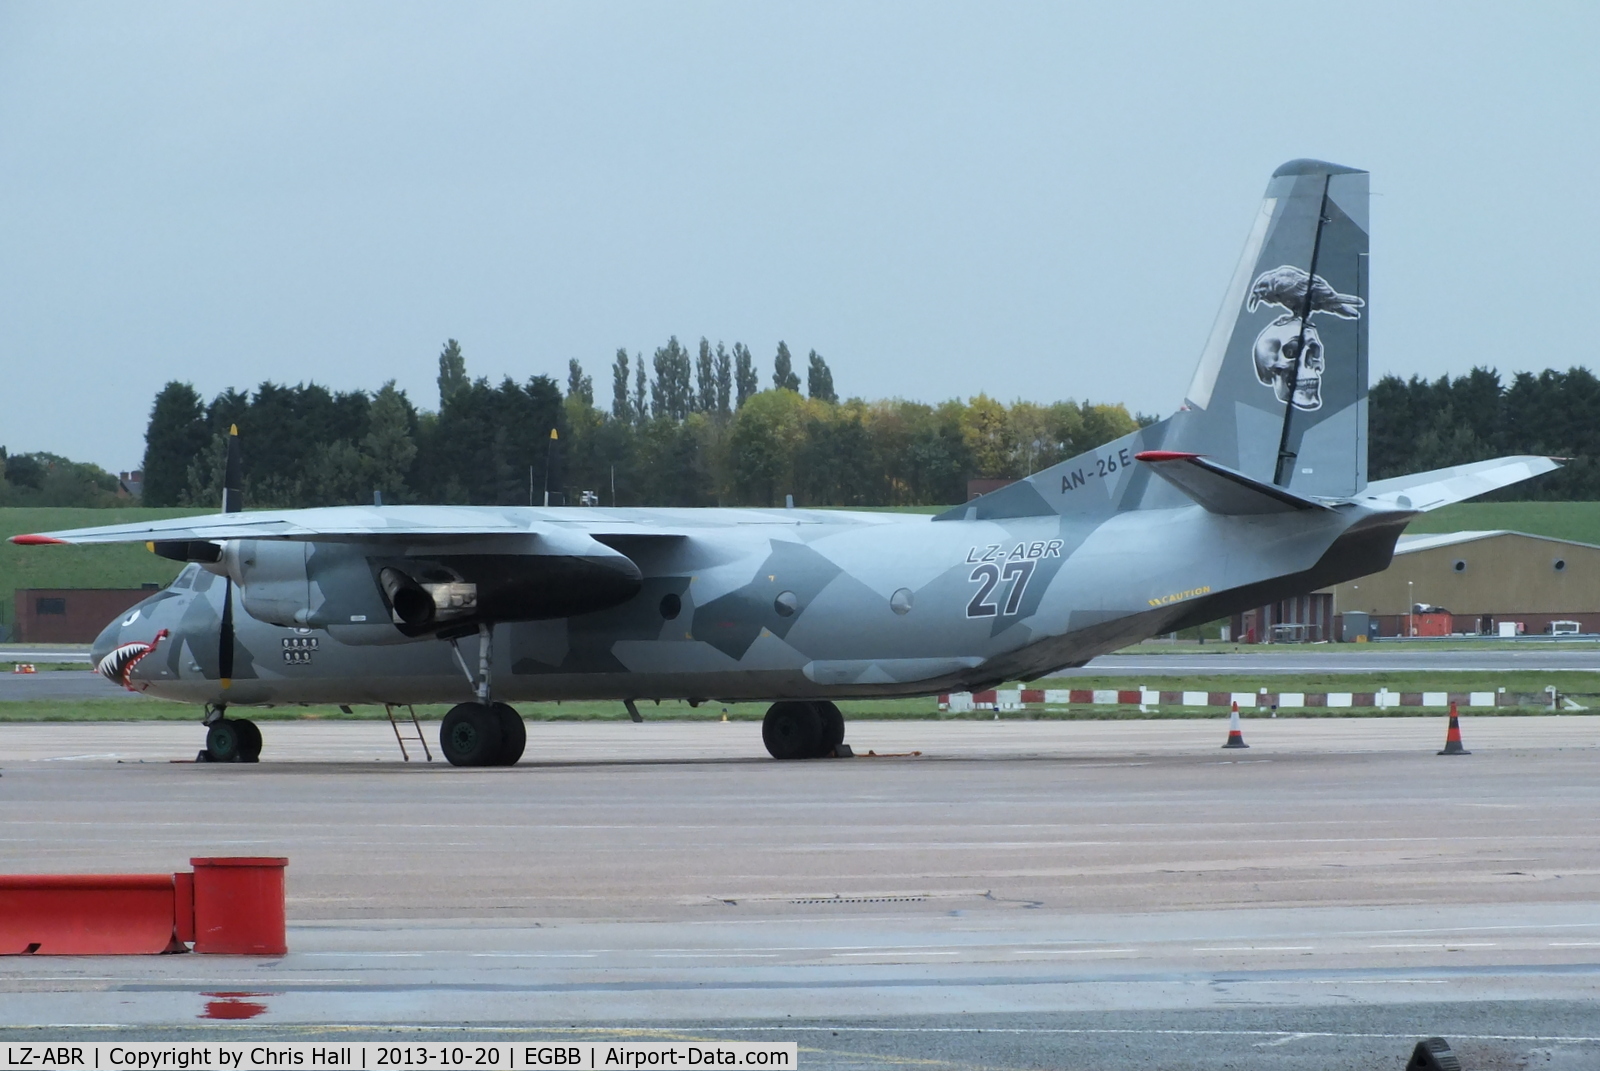 LZ-ABR, 1984 Antonov An-26B C/N 13905, apparently, being used during the filming of the lastest Silvester Stallone movie 